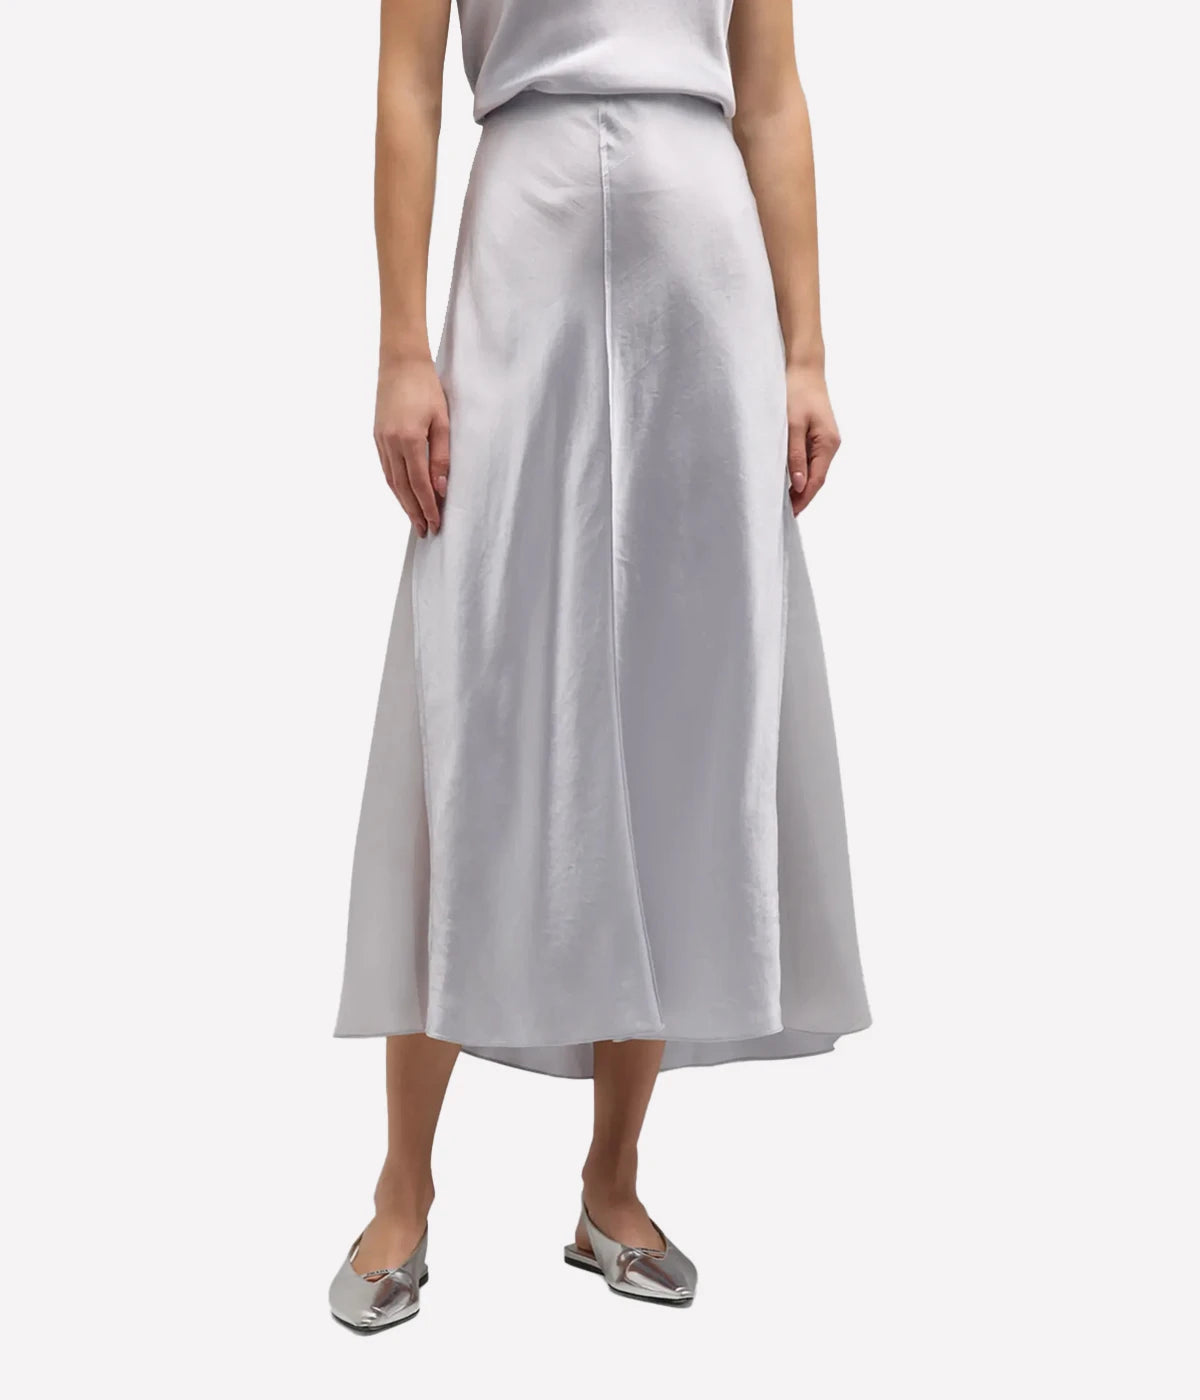 A Vince silver slip skirt with sheer side panels. Straight midi length silhouette, simple and refined, Concealed side-zip closure and an elasticised interior waistband for comfort.  